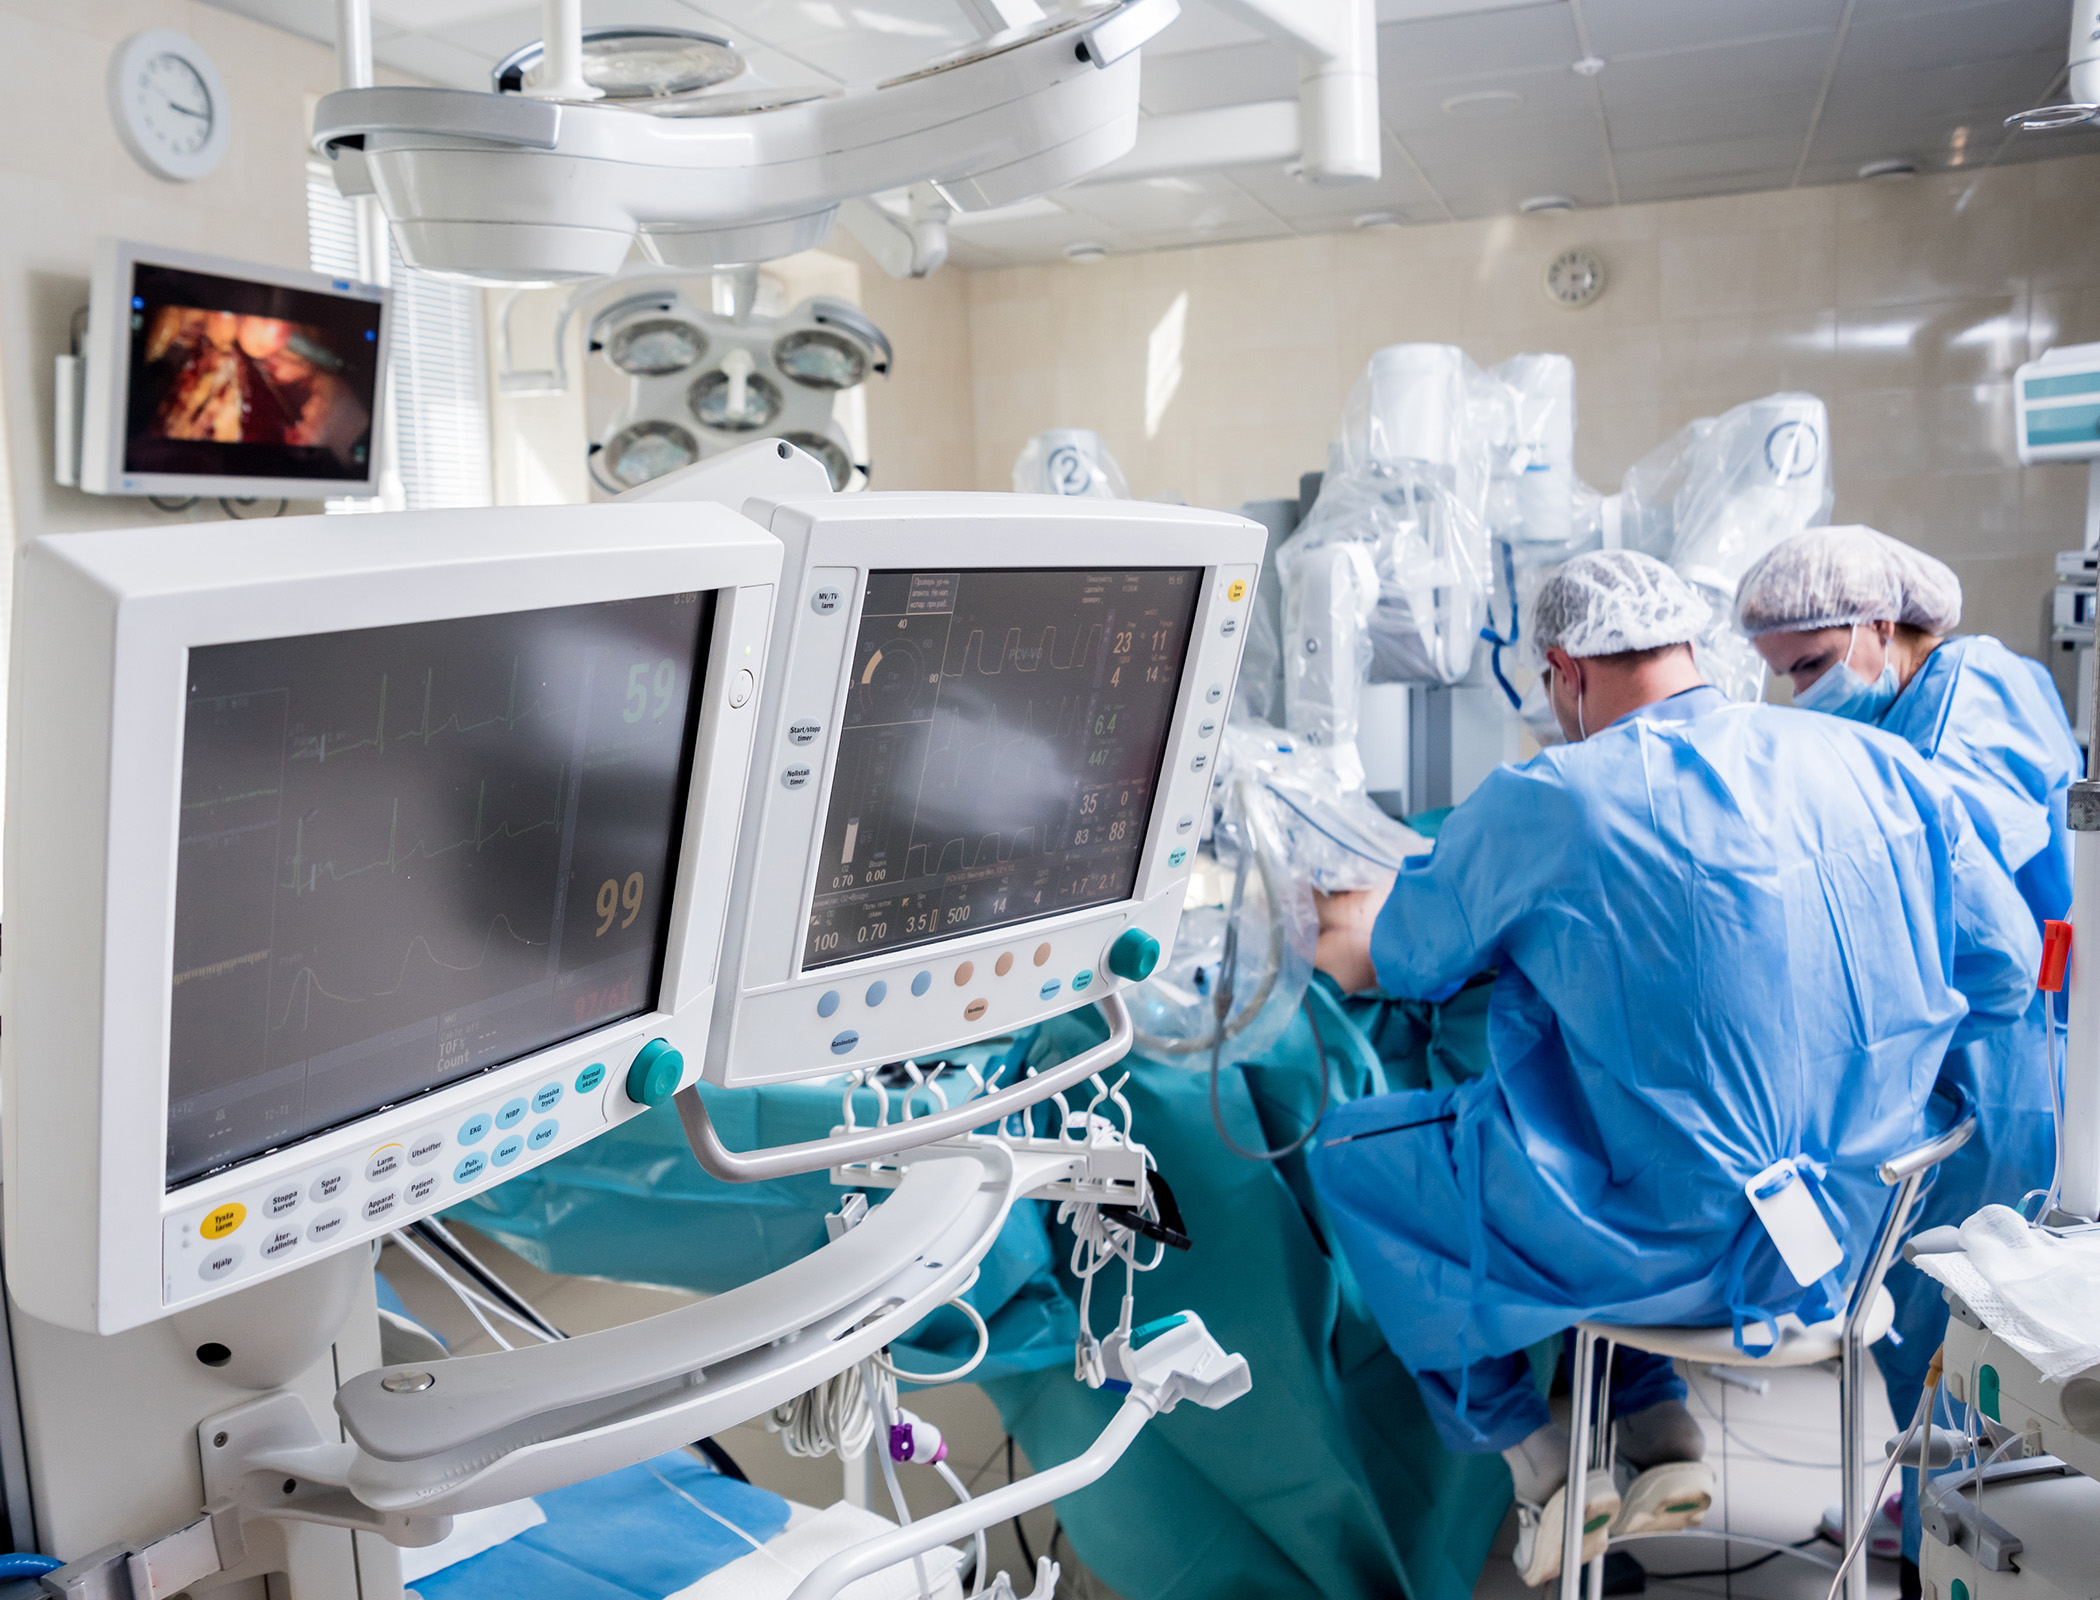 Surgeons urge increased use of robotics in operations to improve outcomes